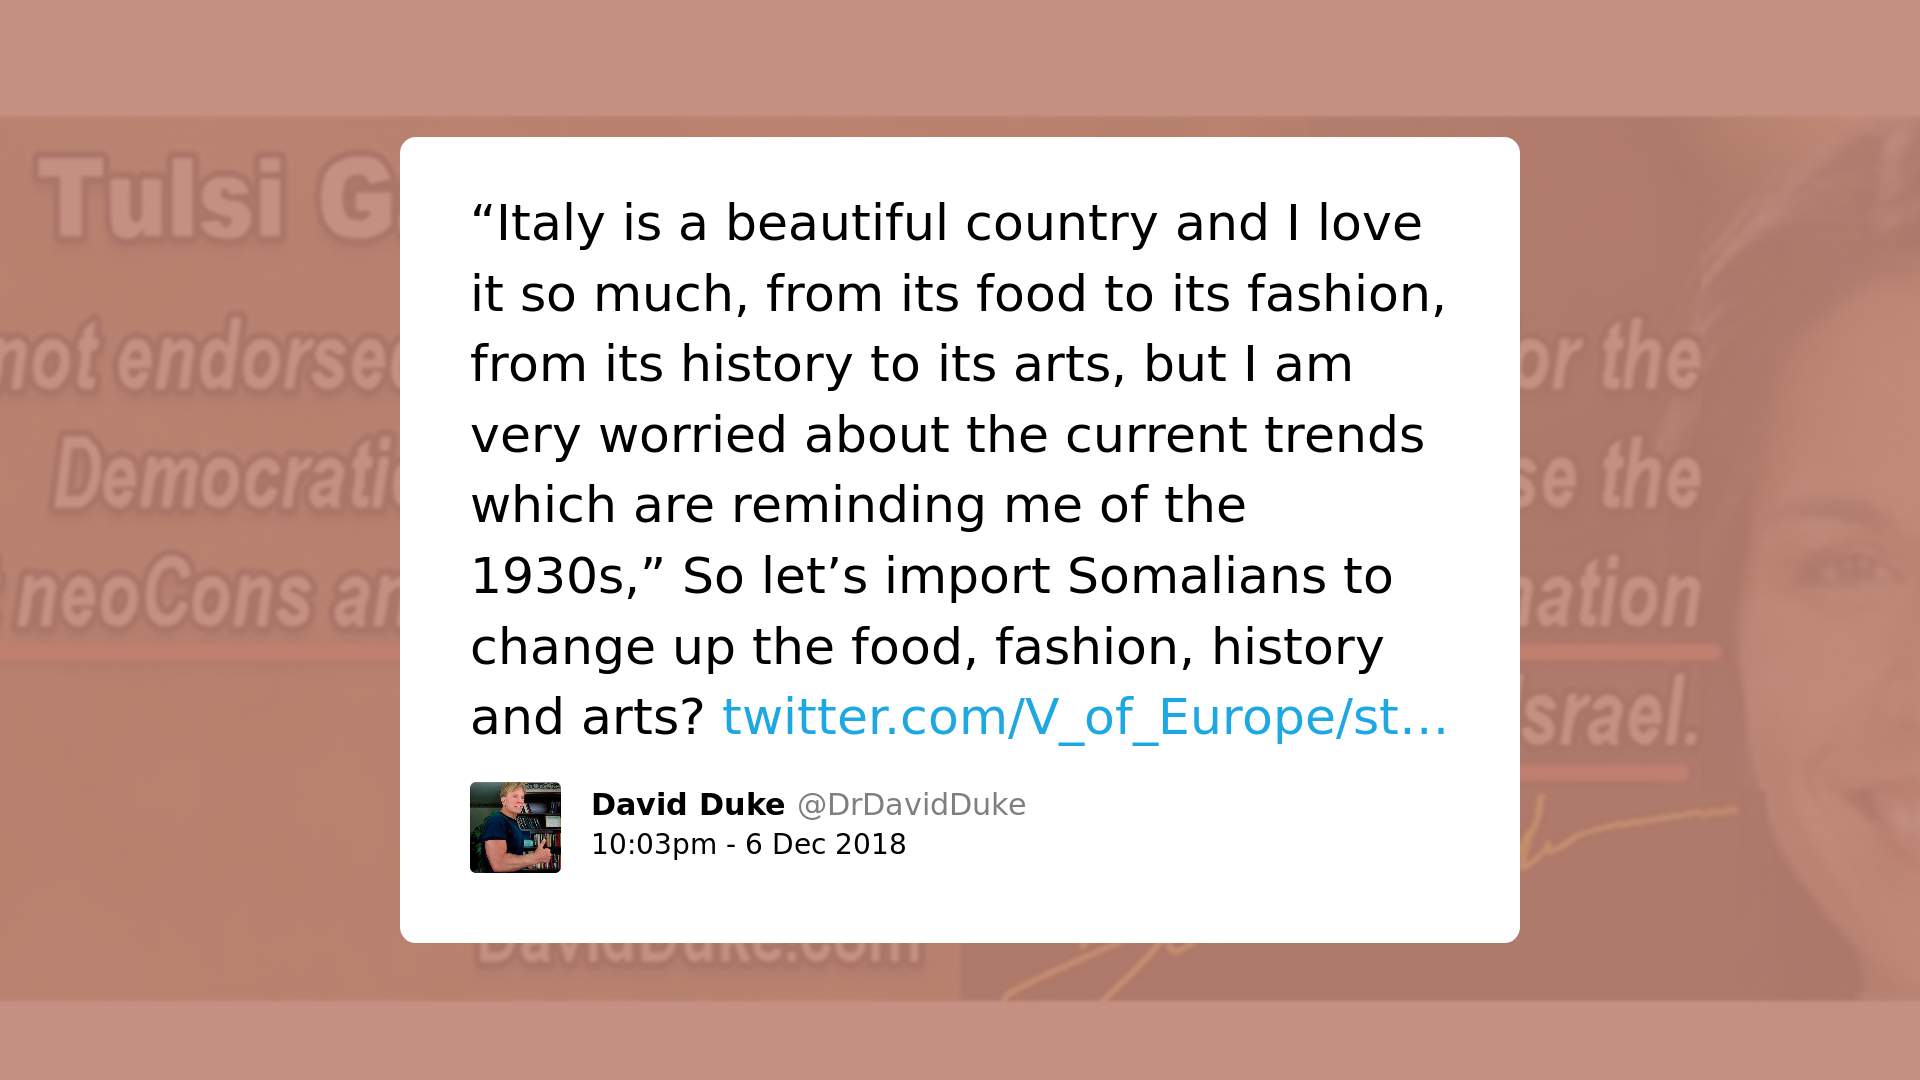 Print screen de postagem de David Duke com o texto: "Italy is a beautiful country and I love it so much, from its food to its fashion, from its history to its arts, but I am very worried about the current trends which are reminding me of the 1930s," So let's import Somalians to change up the food, fashion, history and arts?